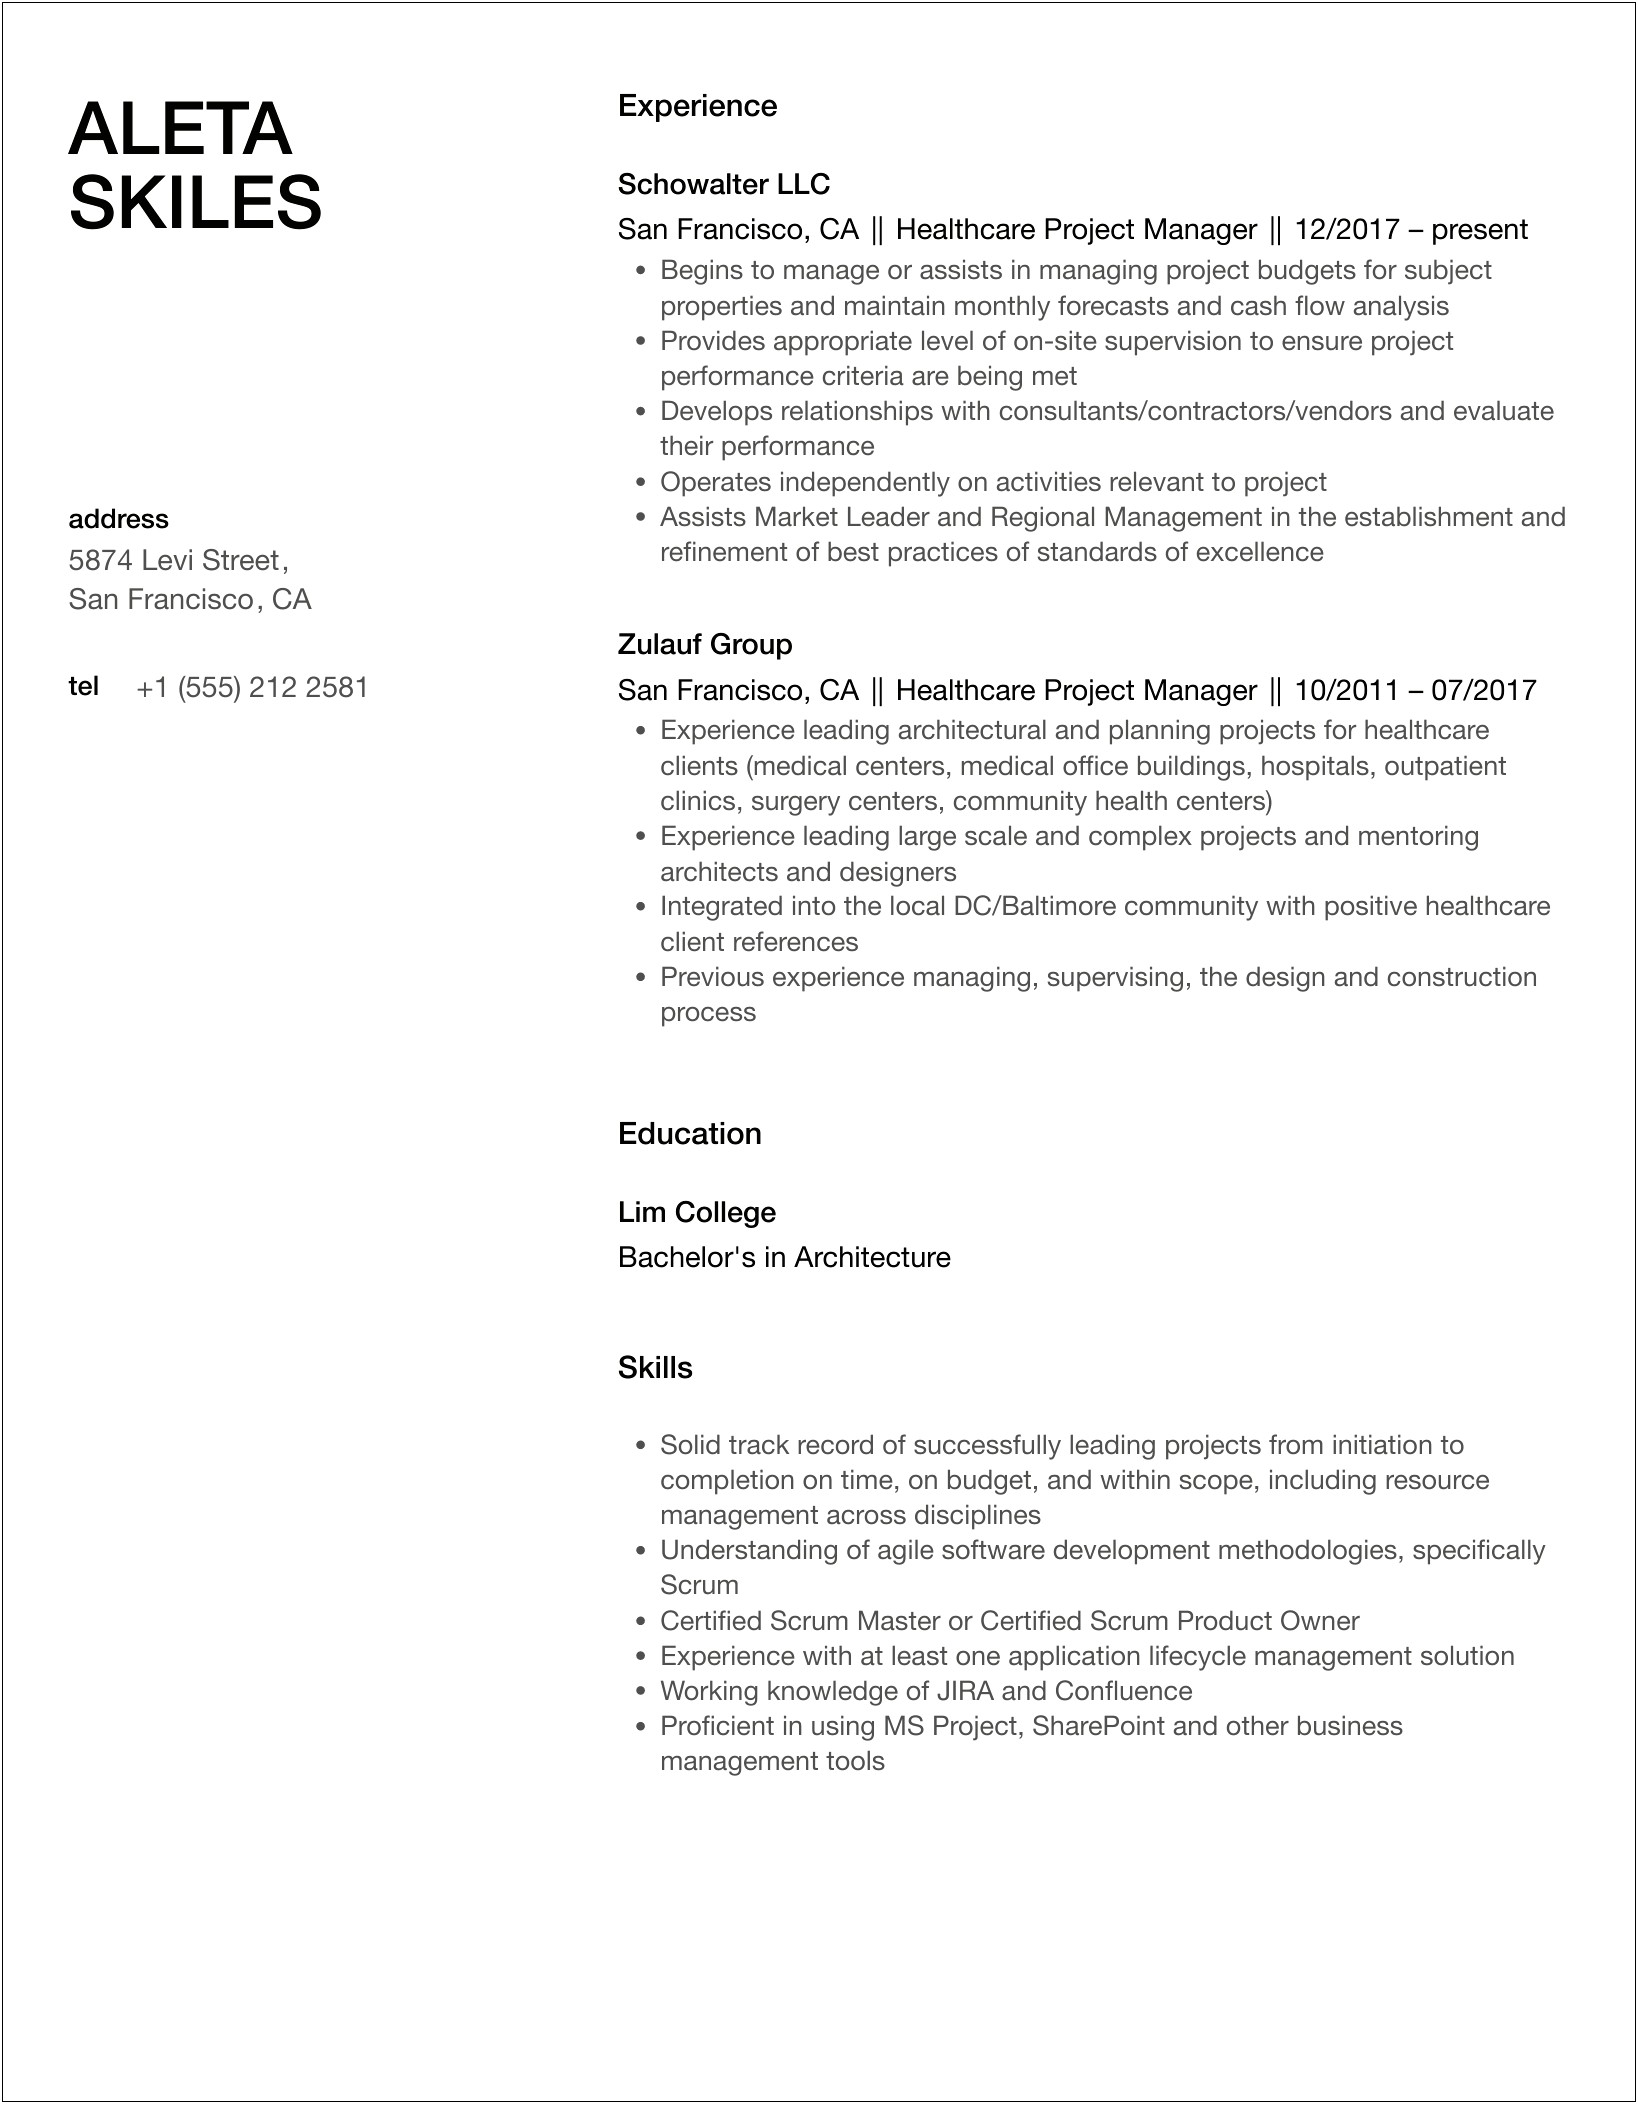 Resume For A&w Healthcare Management